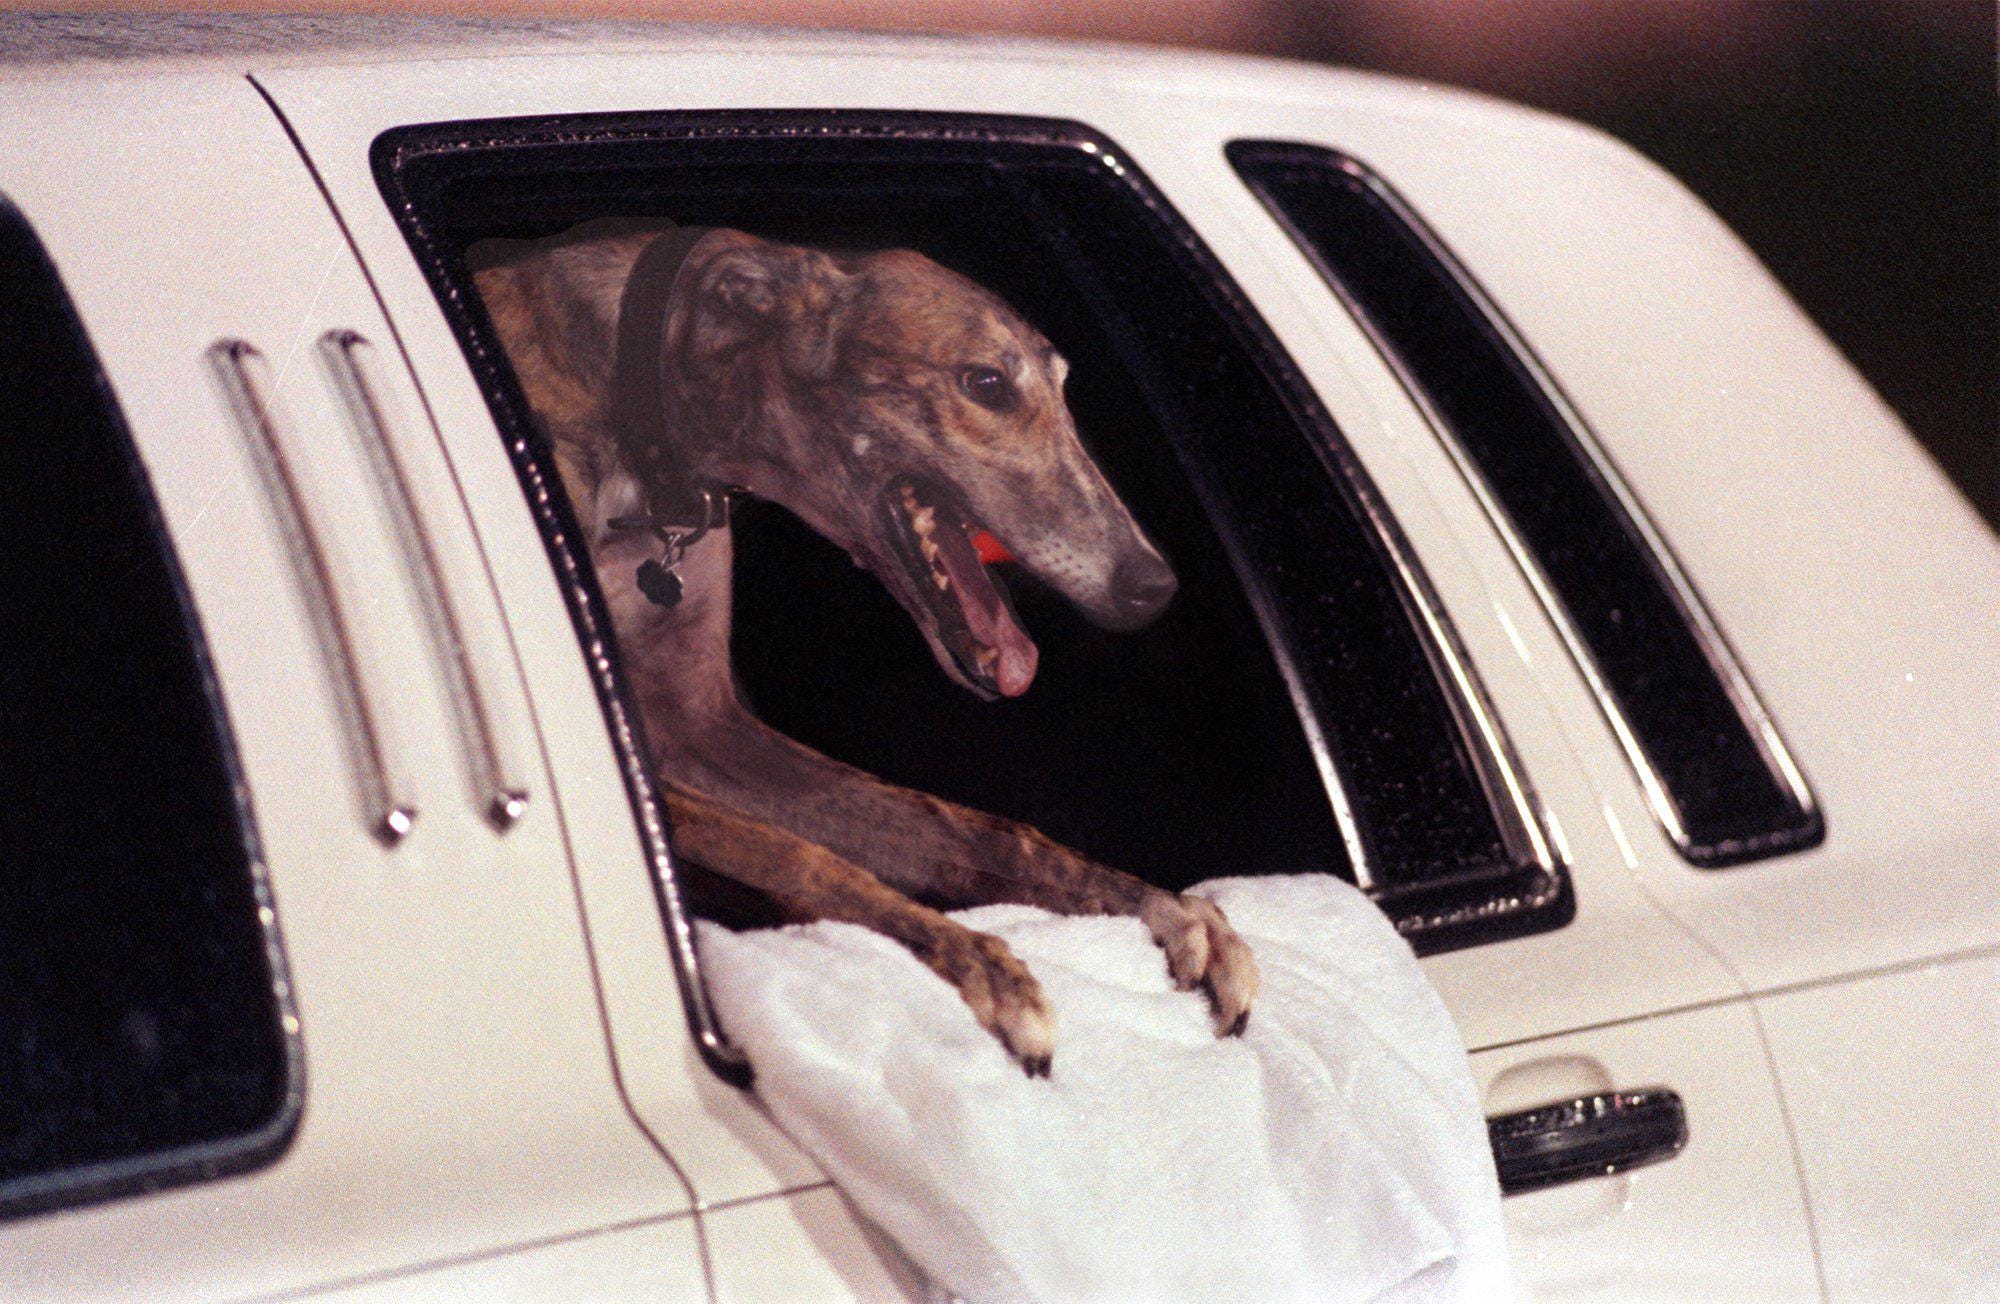 Pat C Rendezvous gets a limo ride back to the finish line after winning her 32nd race in a row to tie the world consecutive record at the Palm Beach Kennel Club in 1994. A sloppy track prevented the limo from being used the night she set the record.